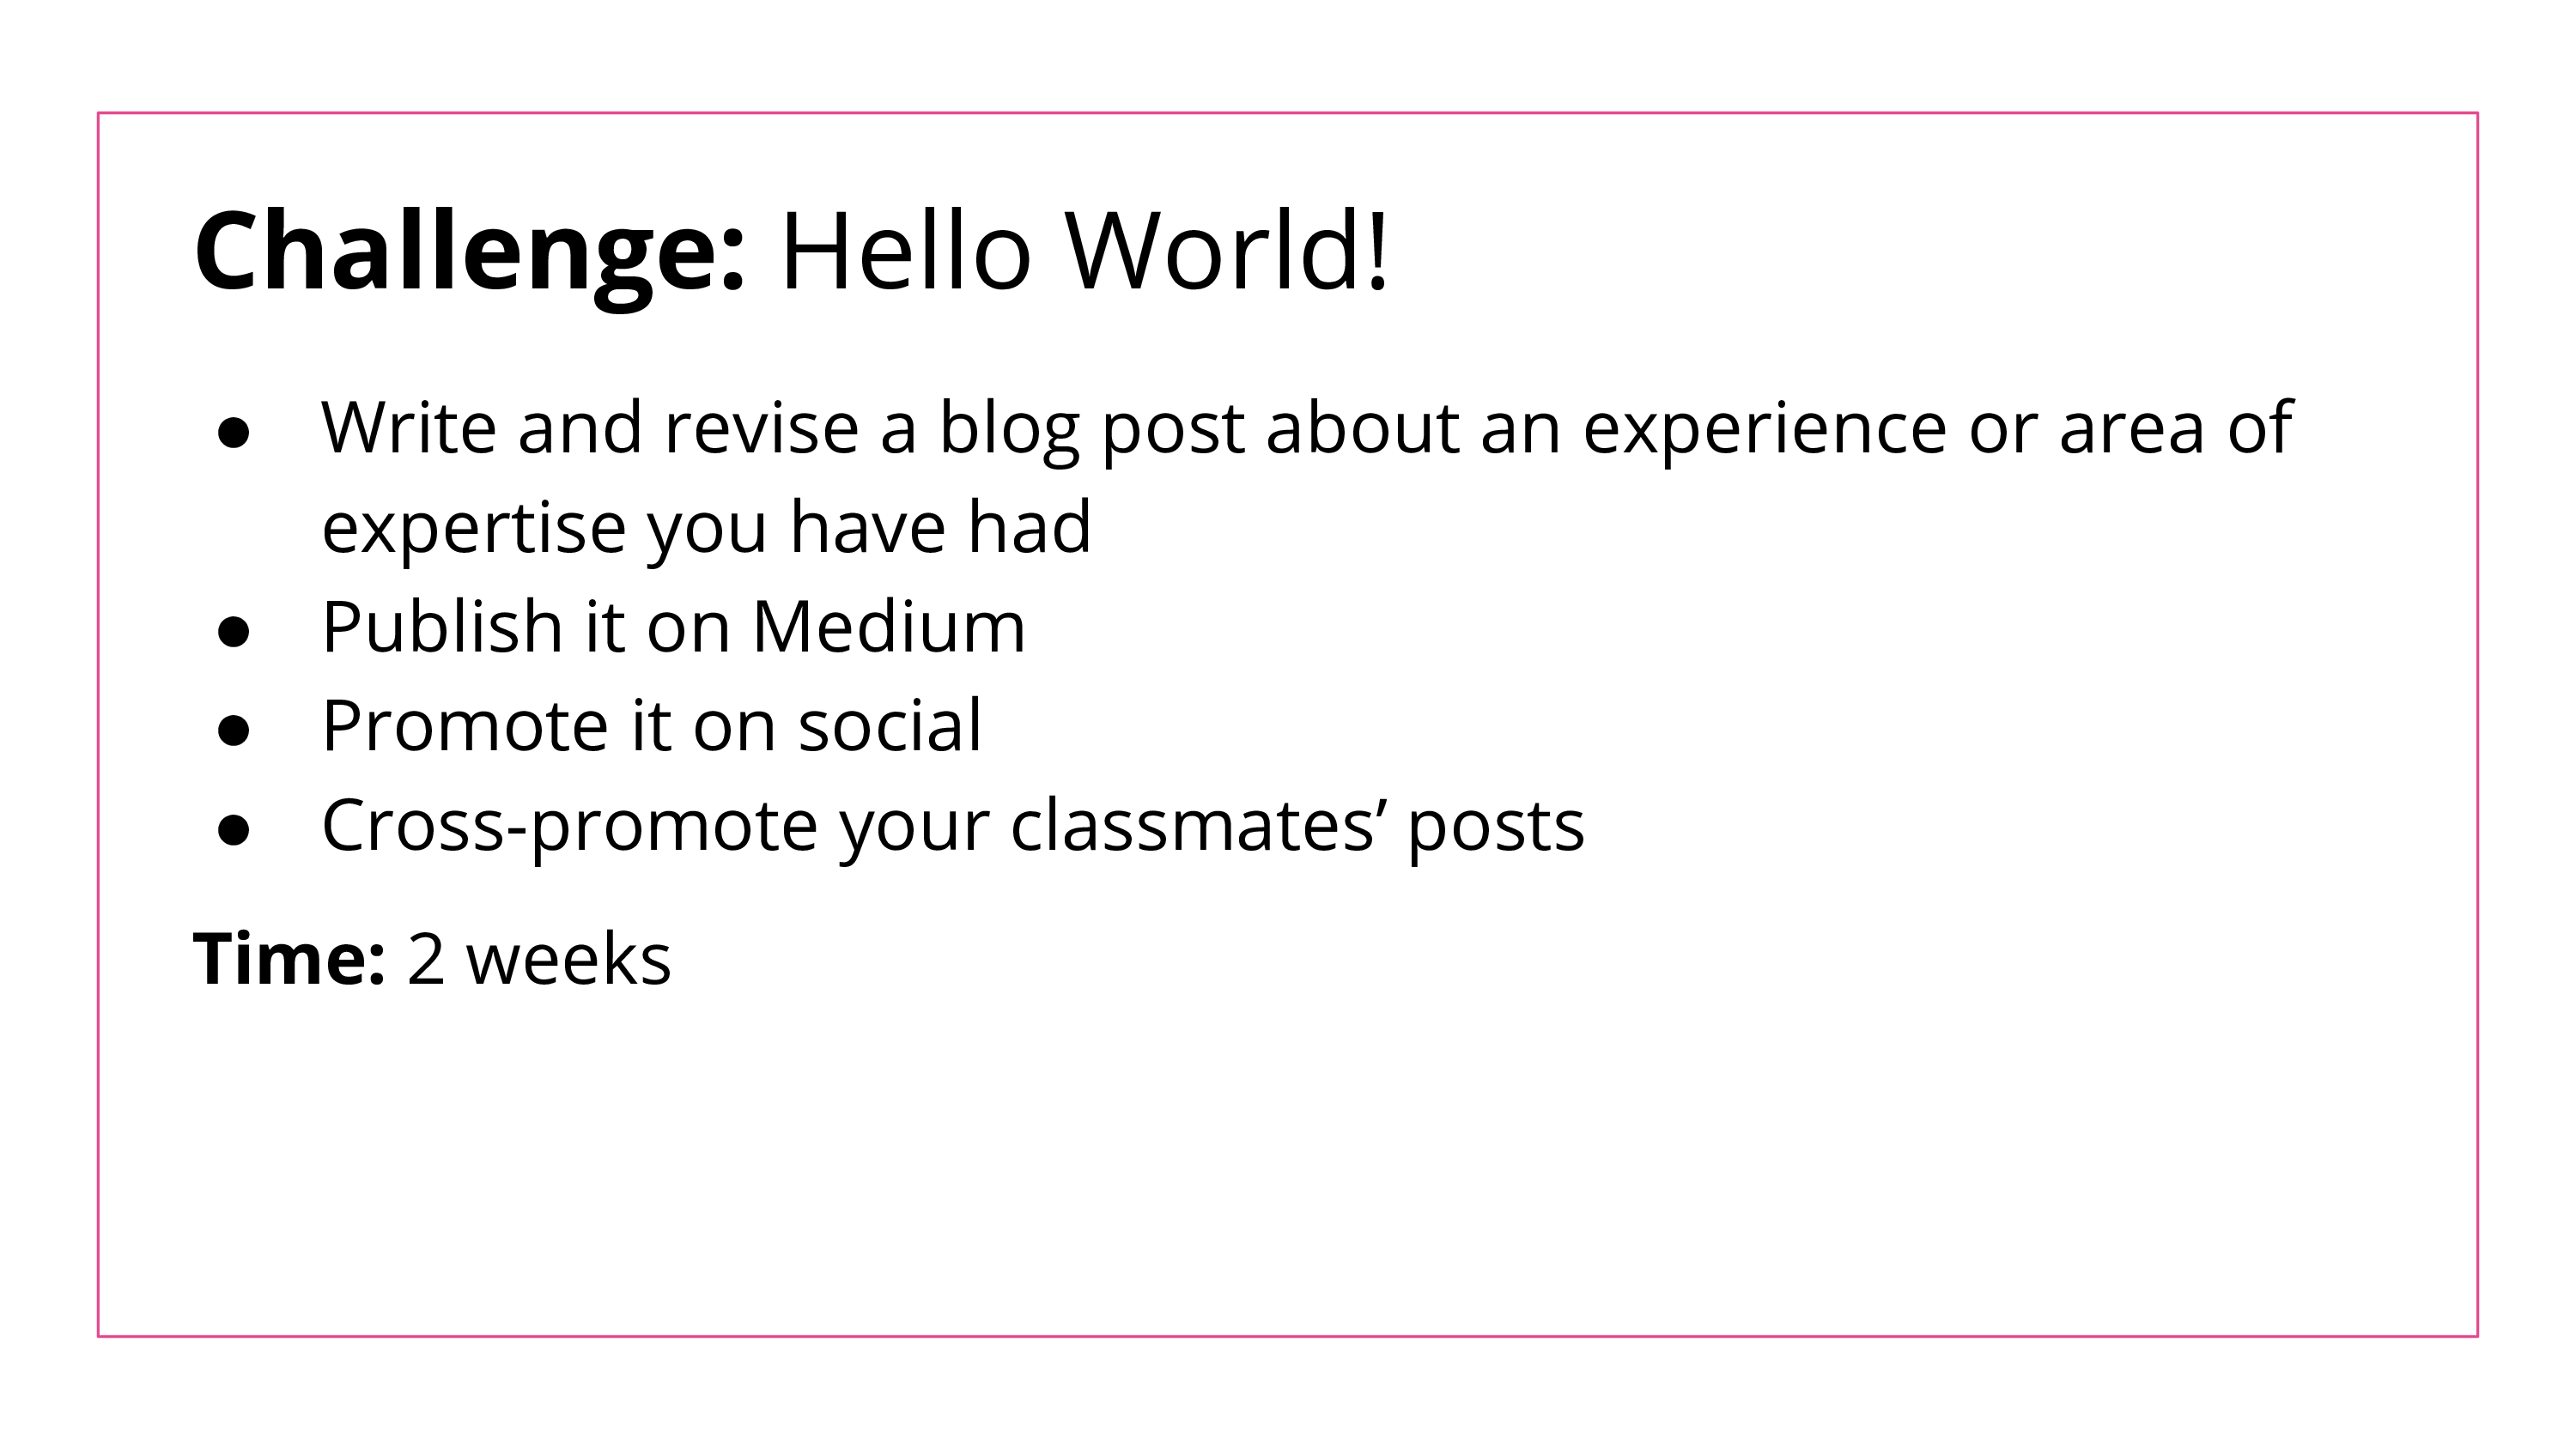 The Hello World! Challenge runs for 2 weeks and asks students to write and revise a blog post about an experience or area of expertise, publish it on Medium, and promote it on social media. Students must also cross-promote their classmates' posts.